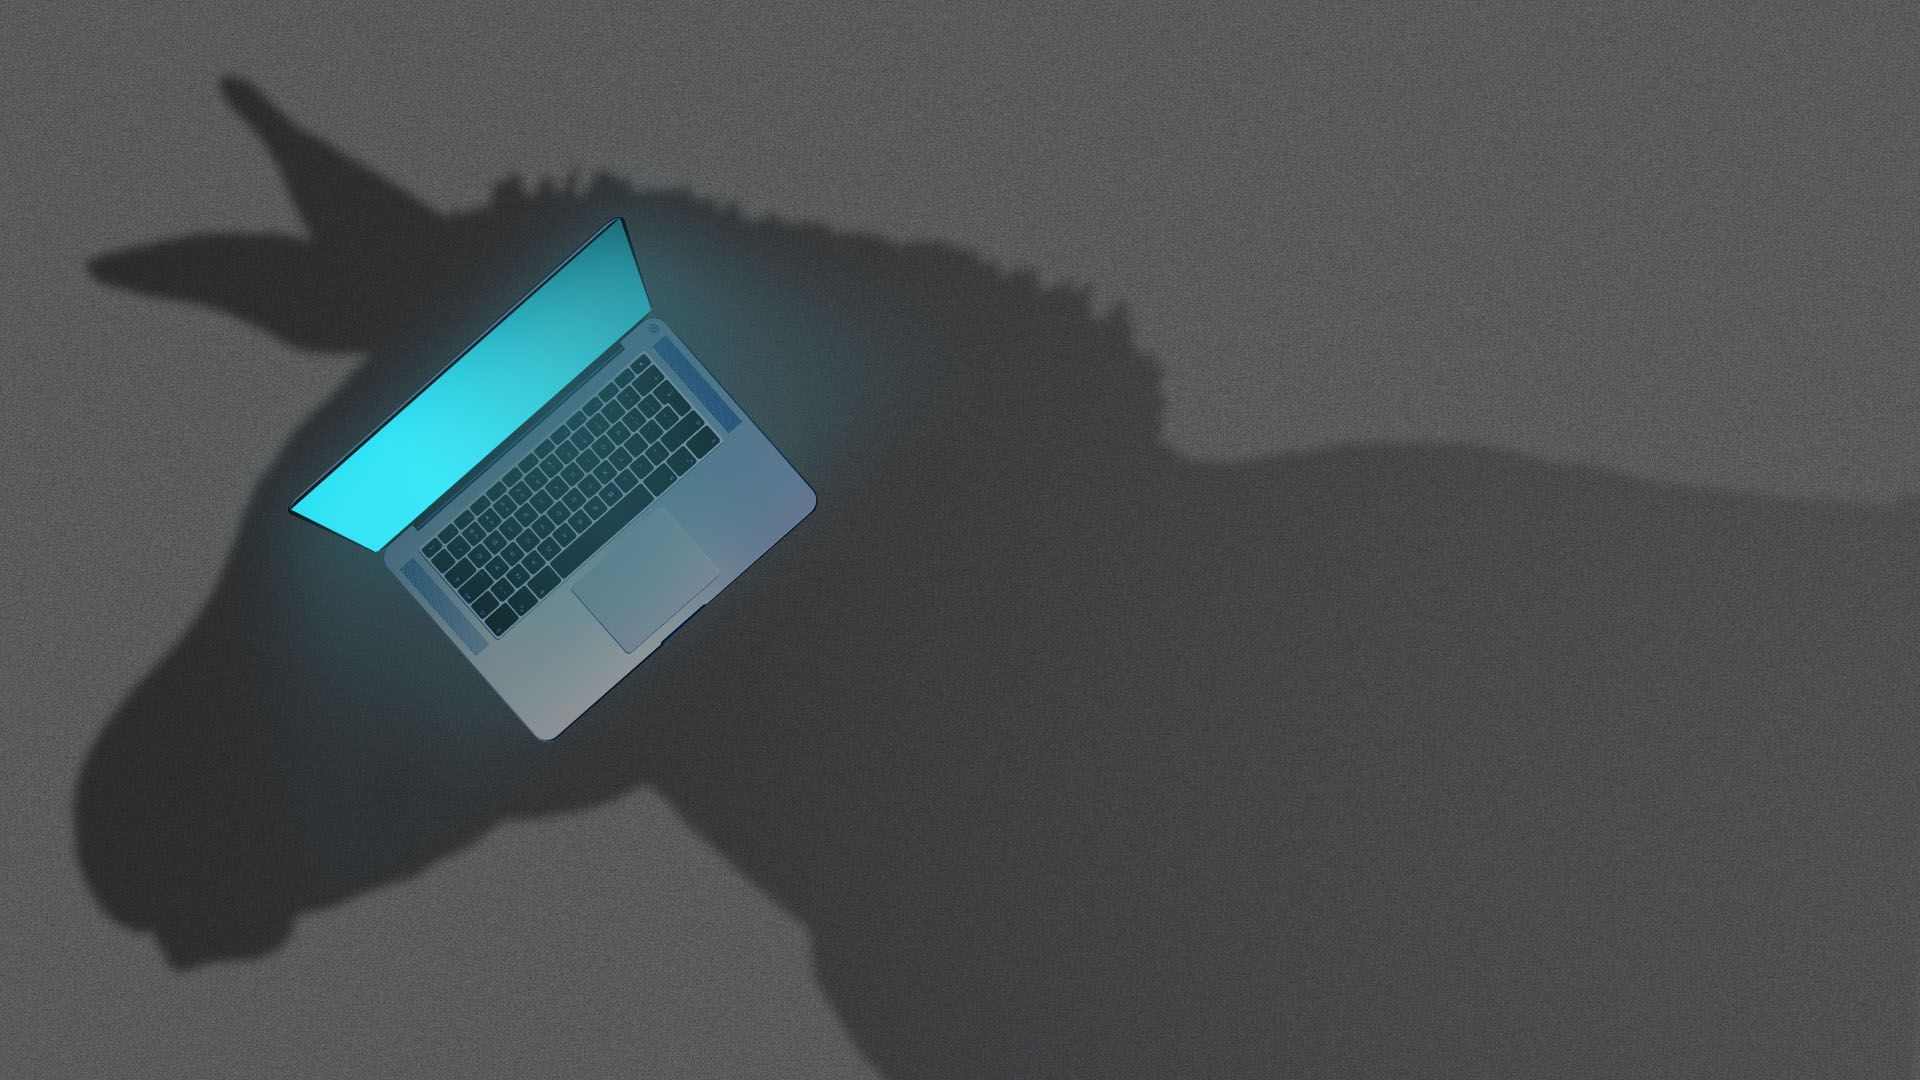 Illustration of the shadow of a donkey hovering over a laptop